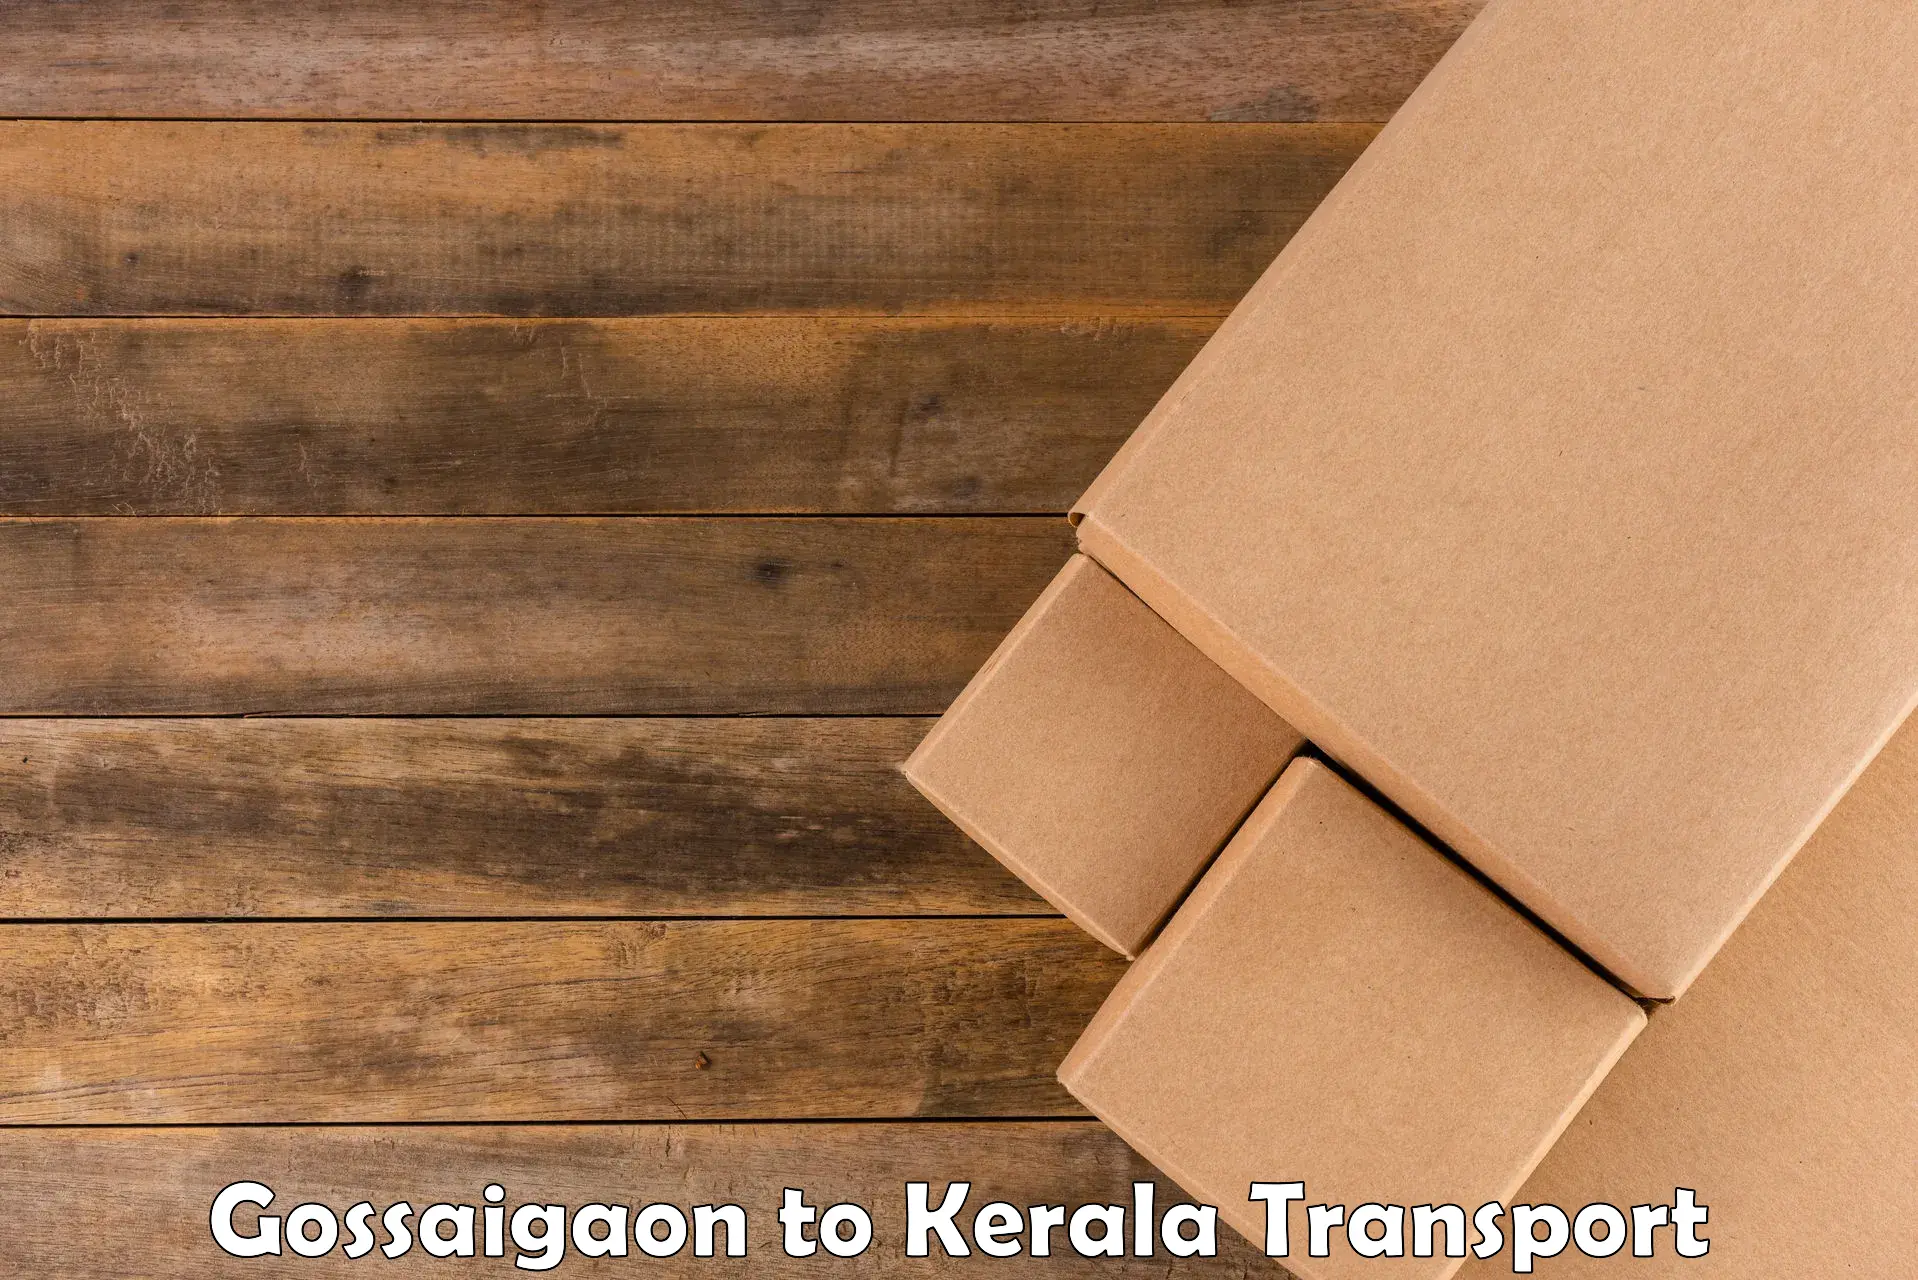 Shipping services Gossaigaon to Kochi